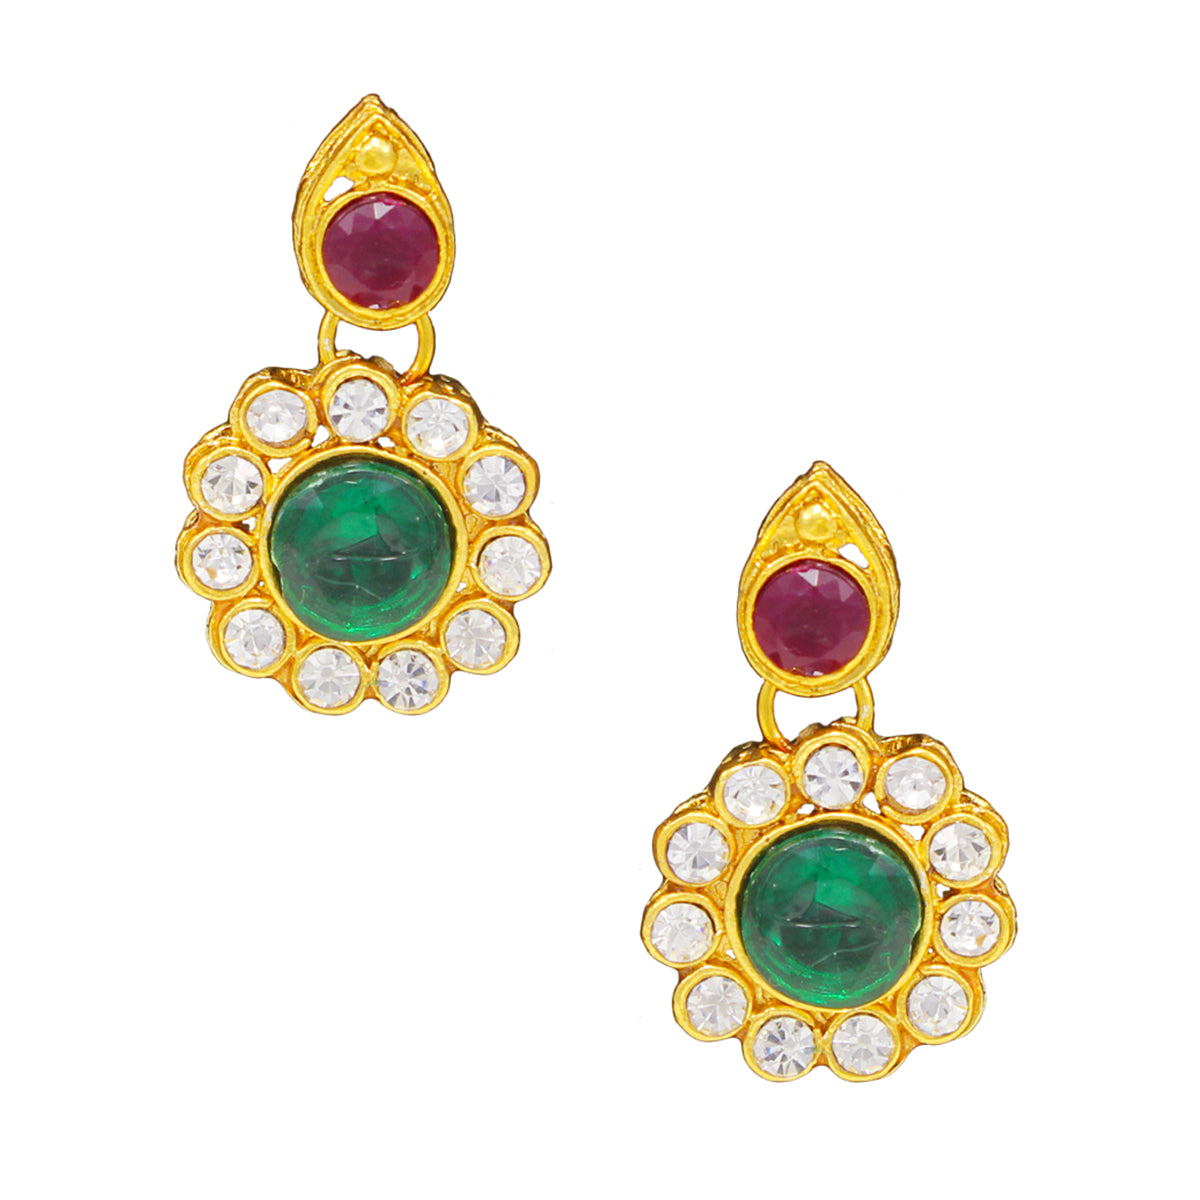 Royal Rani Har Design Necklace and Earrings with Multi-Color Stones